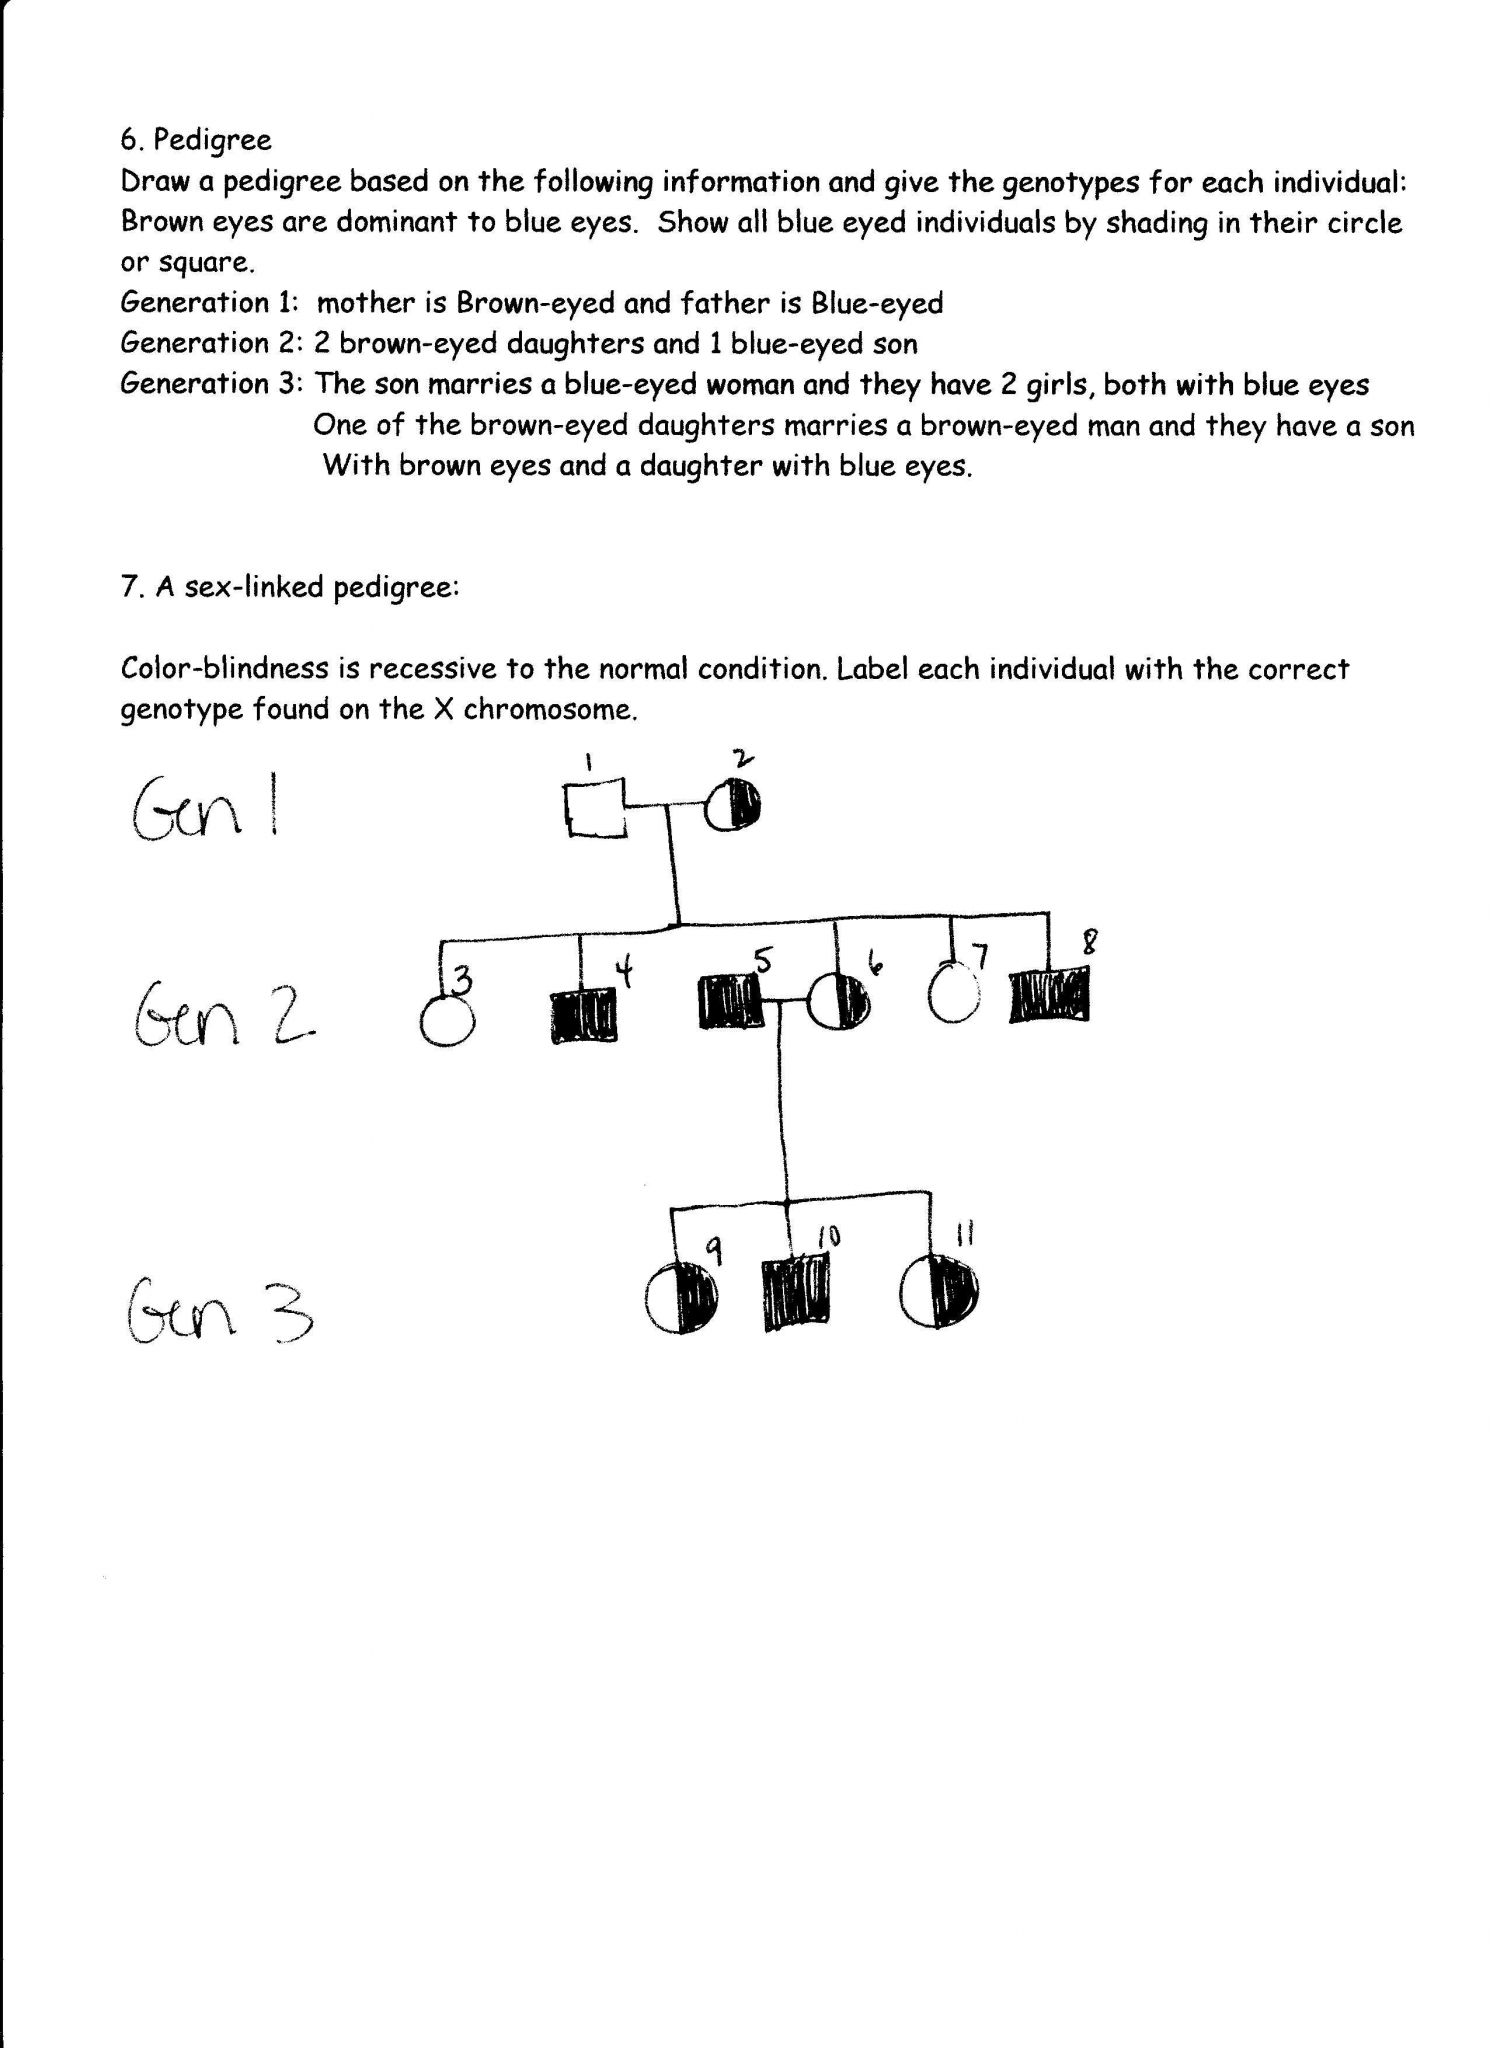 Codominance Incomplete Dominance Worksheet Answers Along with Genetics Pedigree Worksheet Answers Choice Image Worksheet for